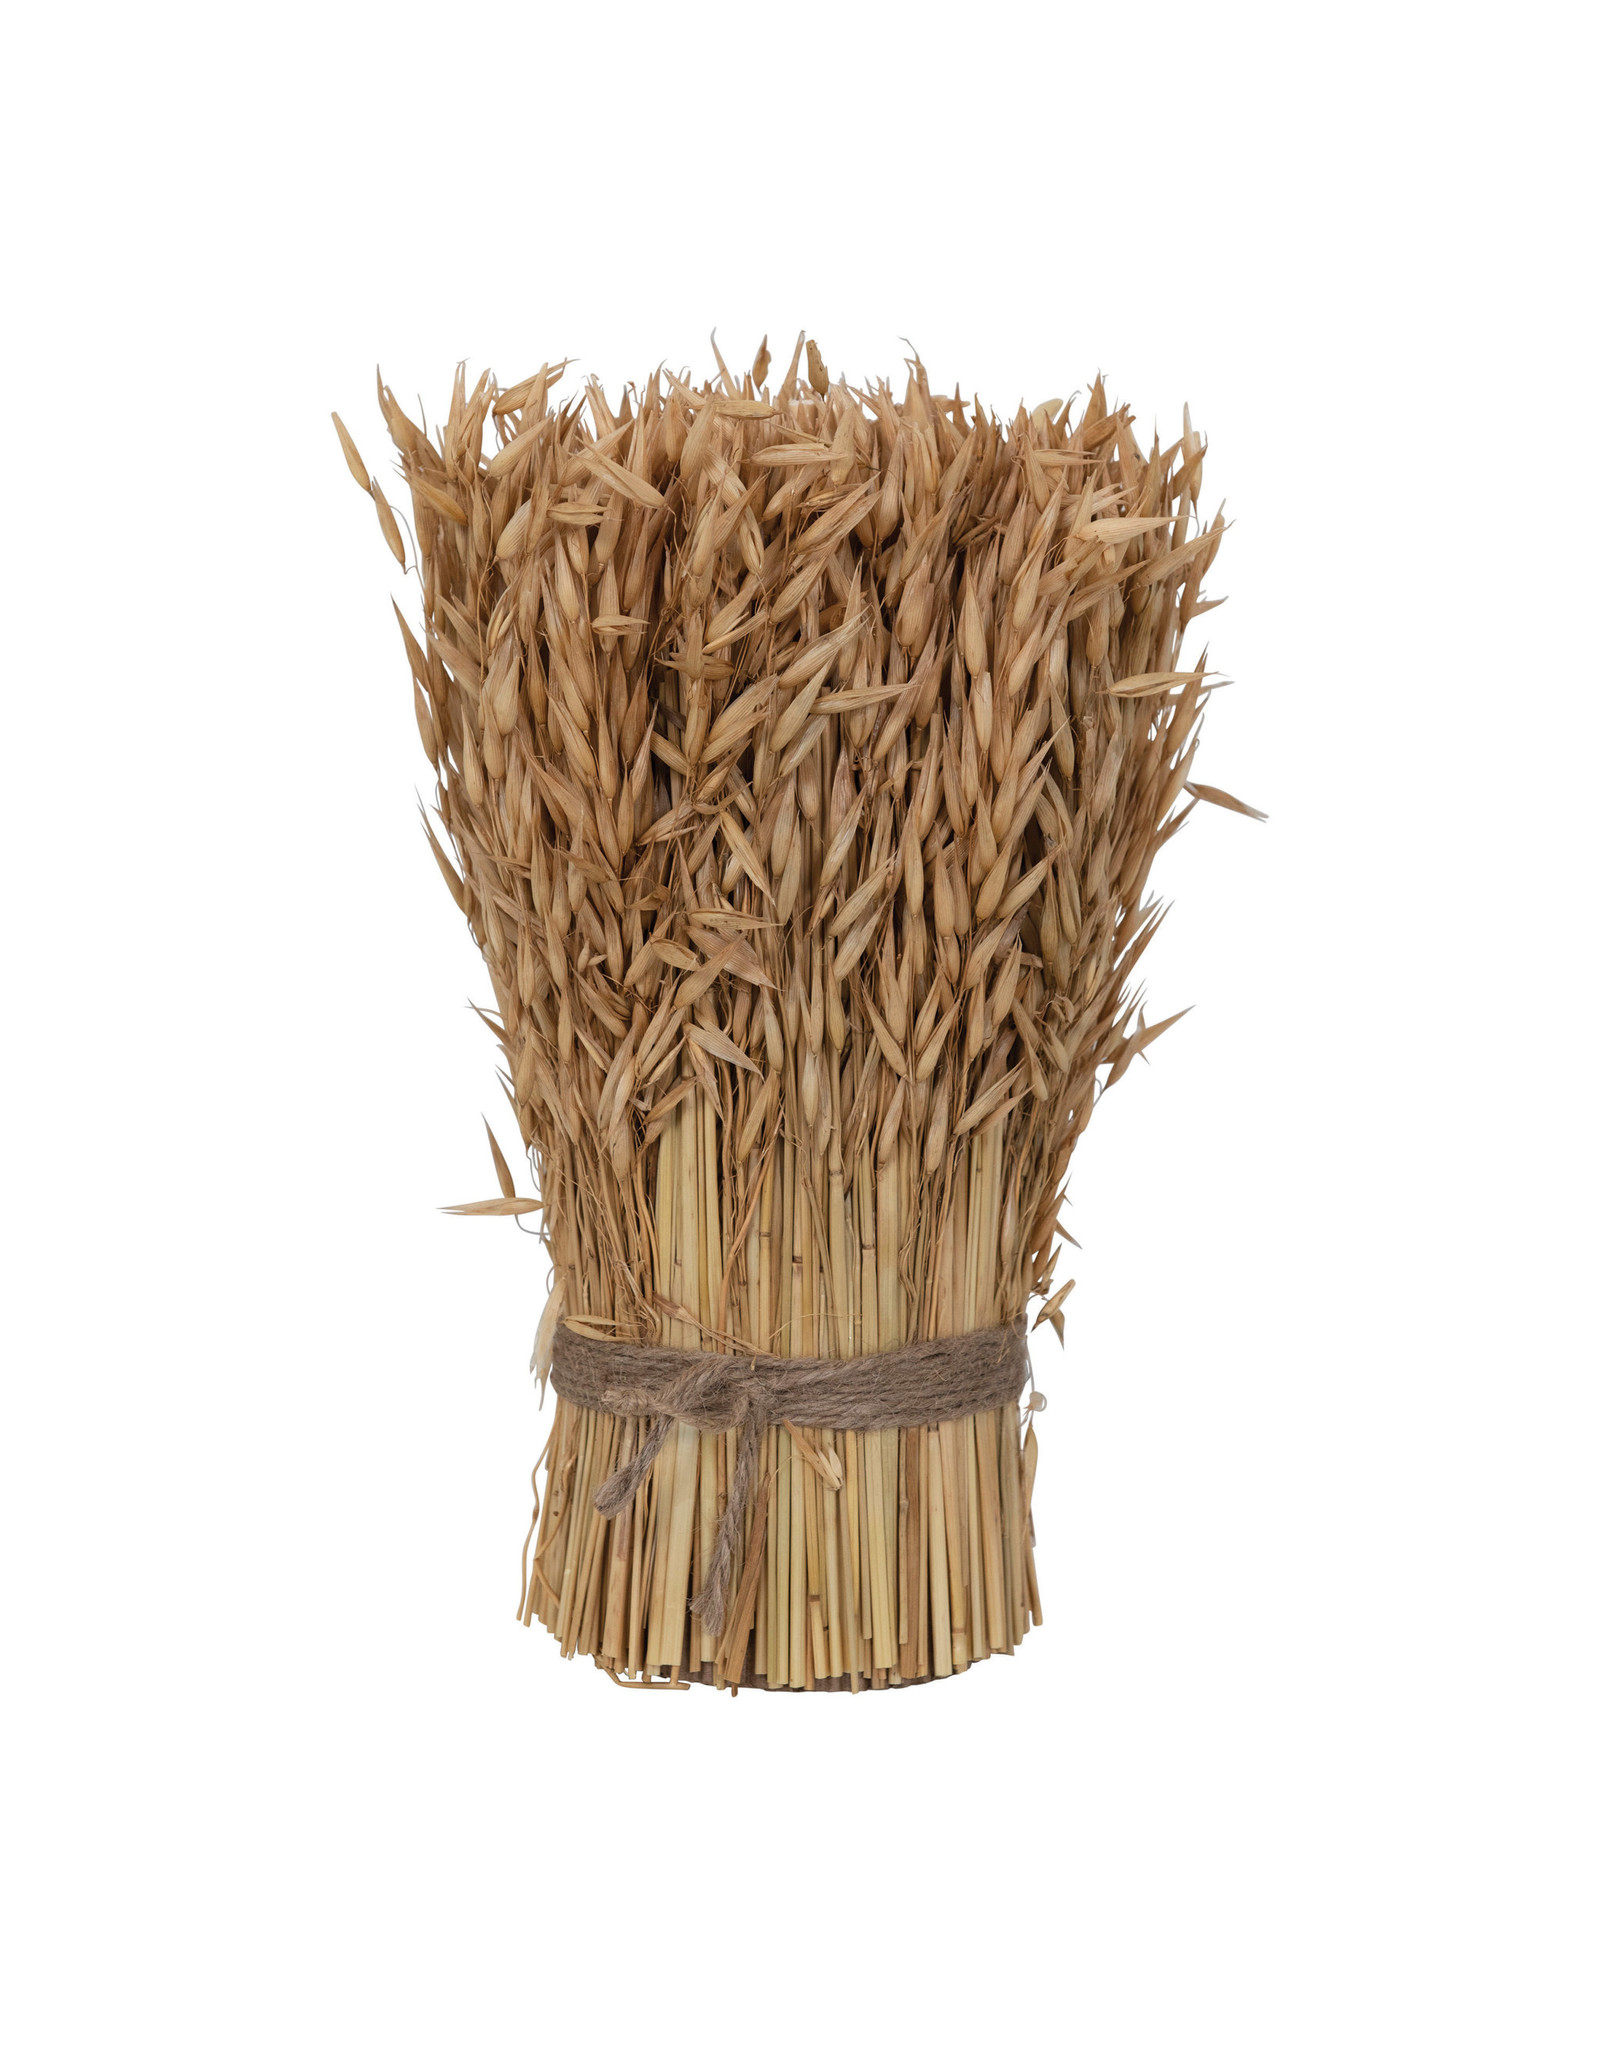 CF3476  Approximately 7"L x 5"W x 11-1/2"H Dried Natural Harvest Grass Standing Bundle